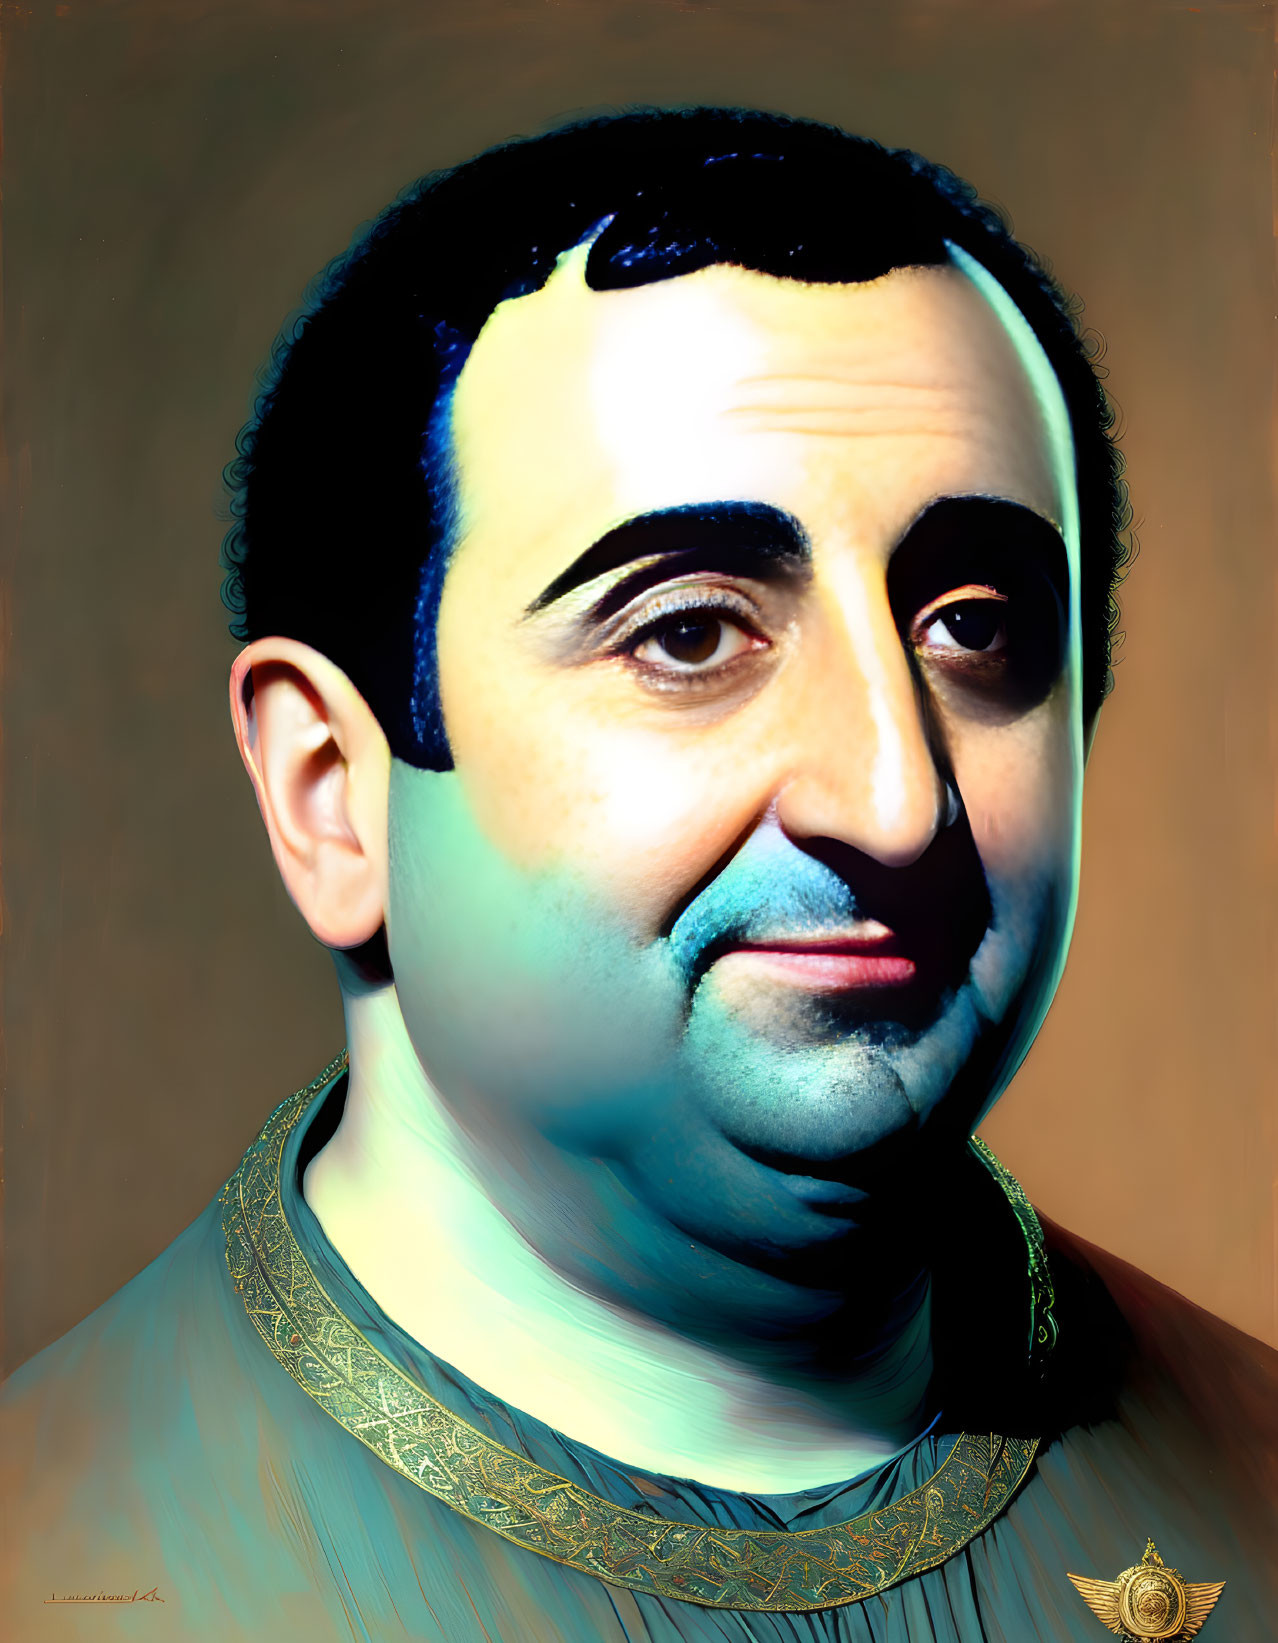 Stylized portrait of a man in blue tunic with gold collar on warm gradient background